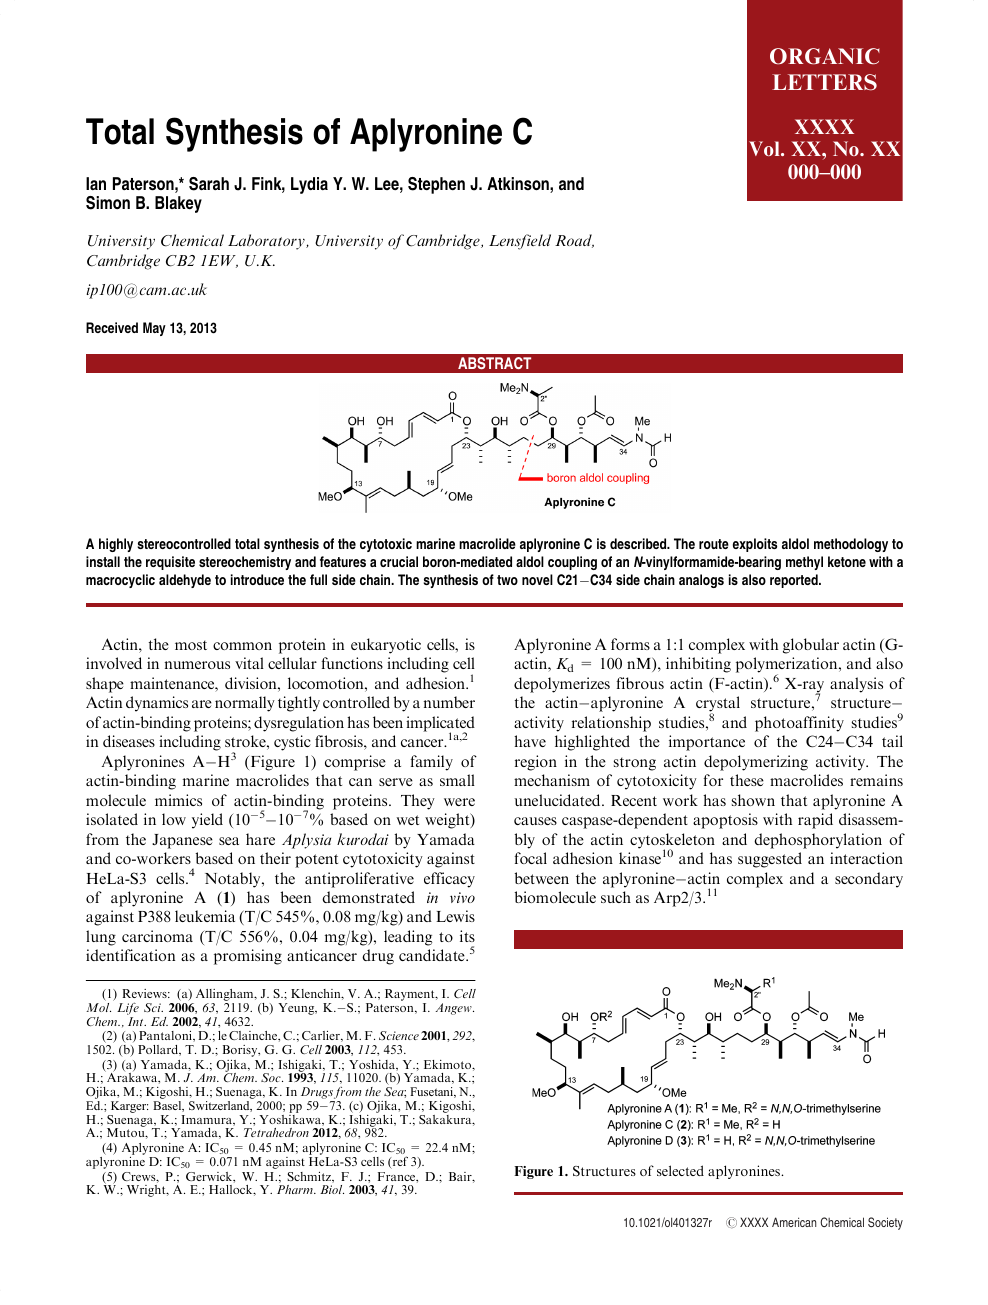 Australia bra rear Total Synthesis of Aplyronine C – topic of research paper in Chemical  sciences. Download scholarly article PDF and read for free on CyberLeninka  open science hub.